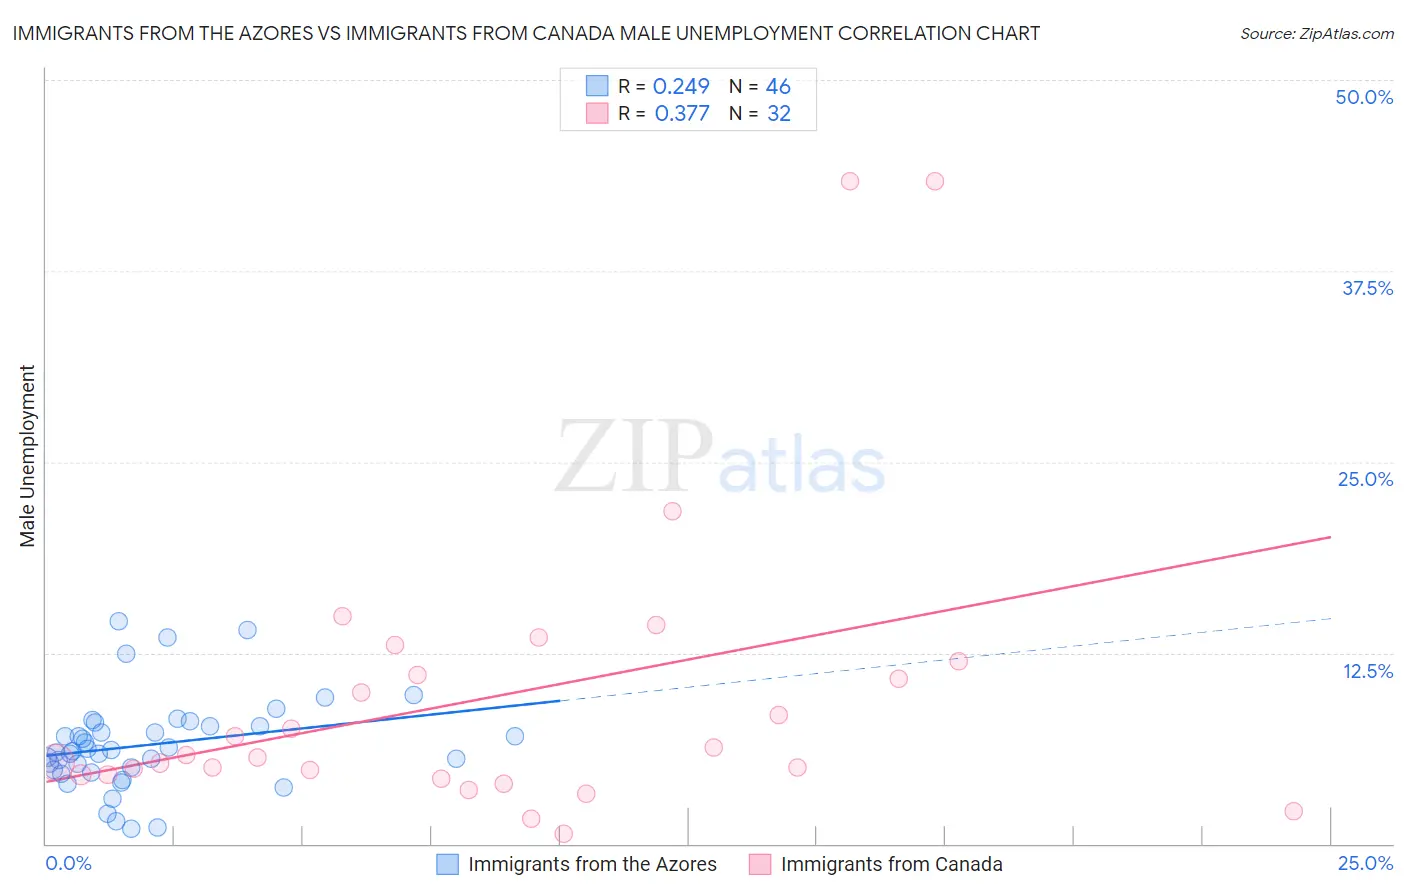 Immigrants from the Azores vs Immigrants from Canada Male Unemployment